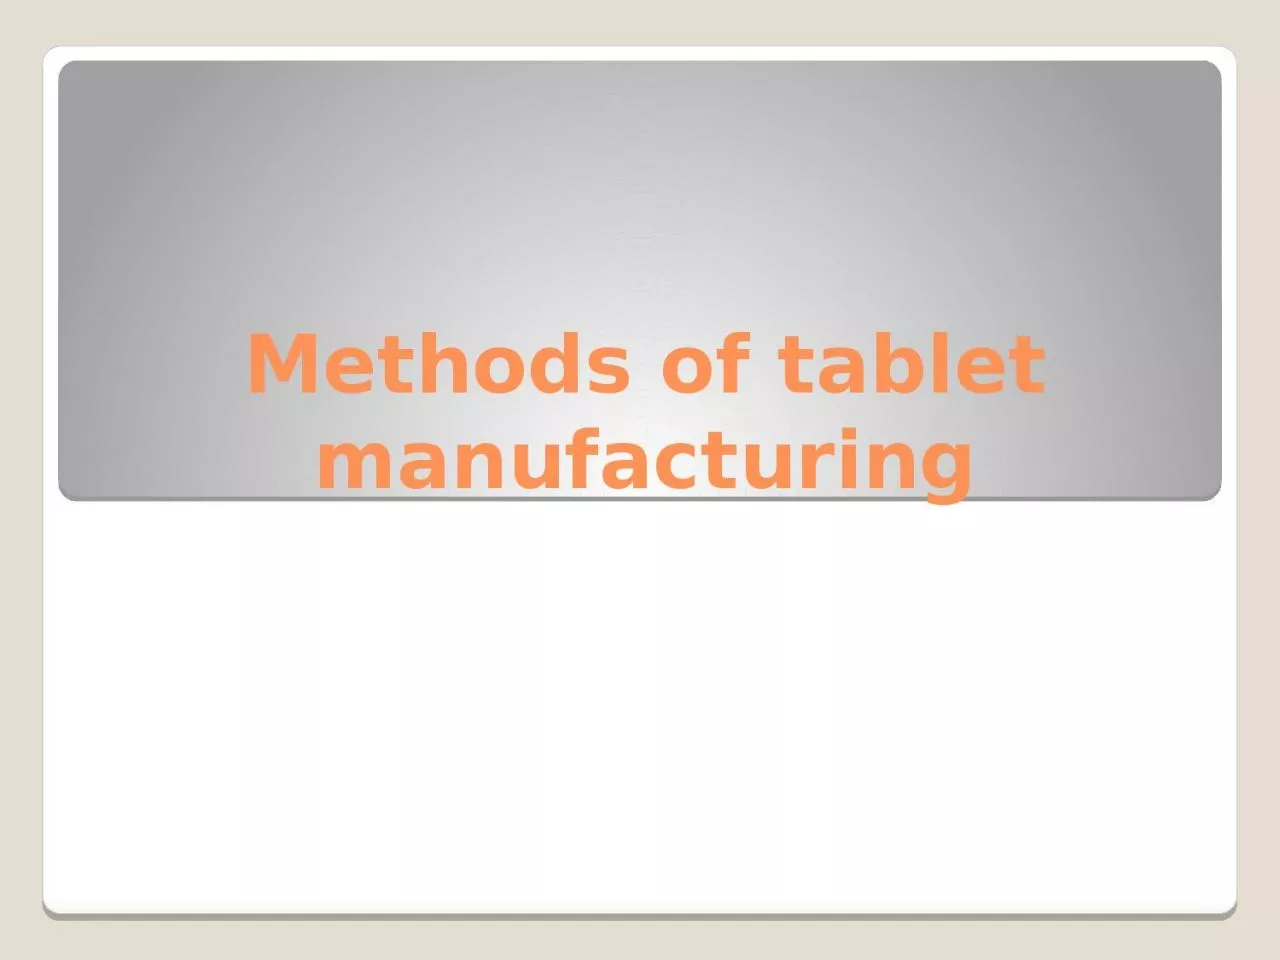 Methods of tablet manufacturing